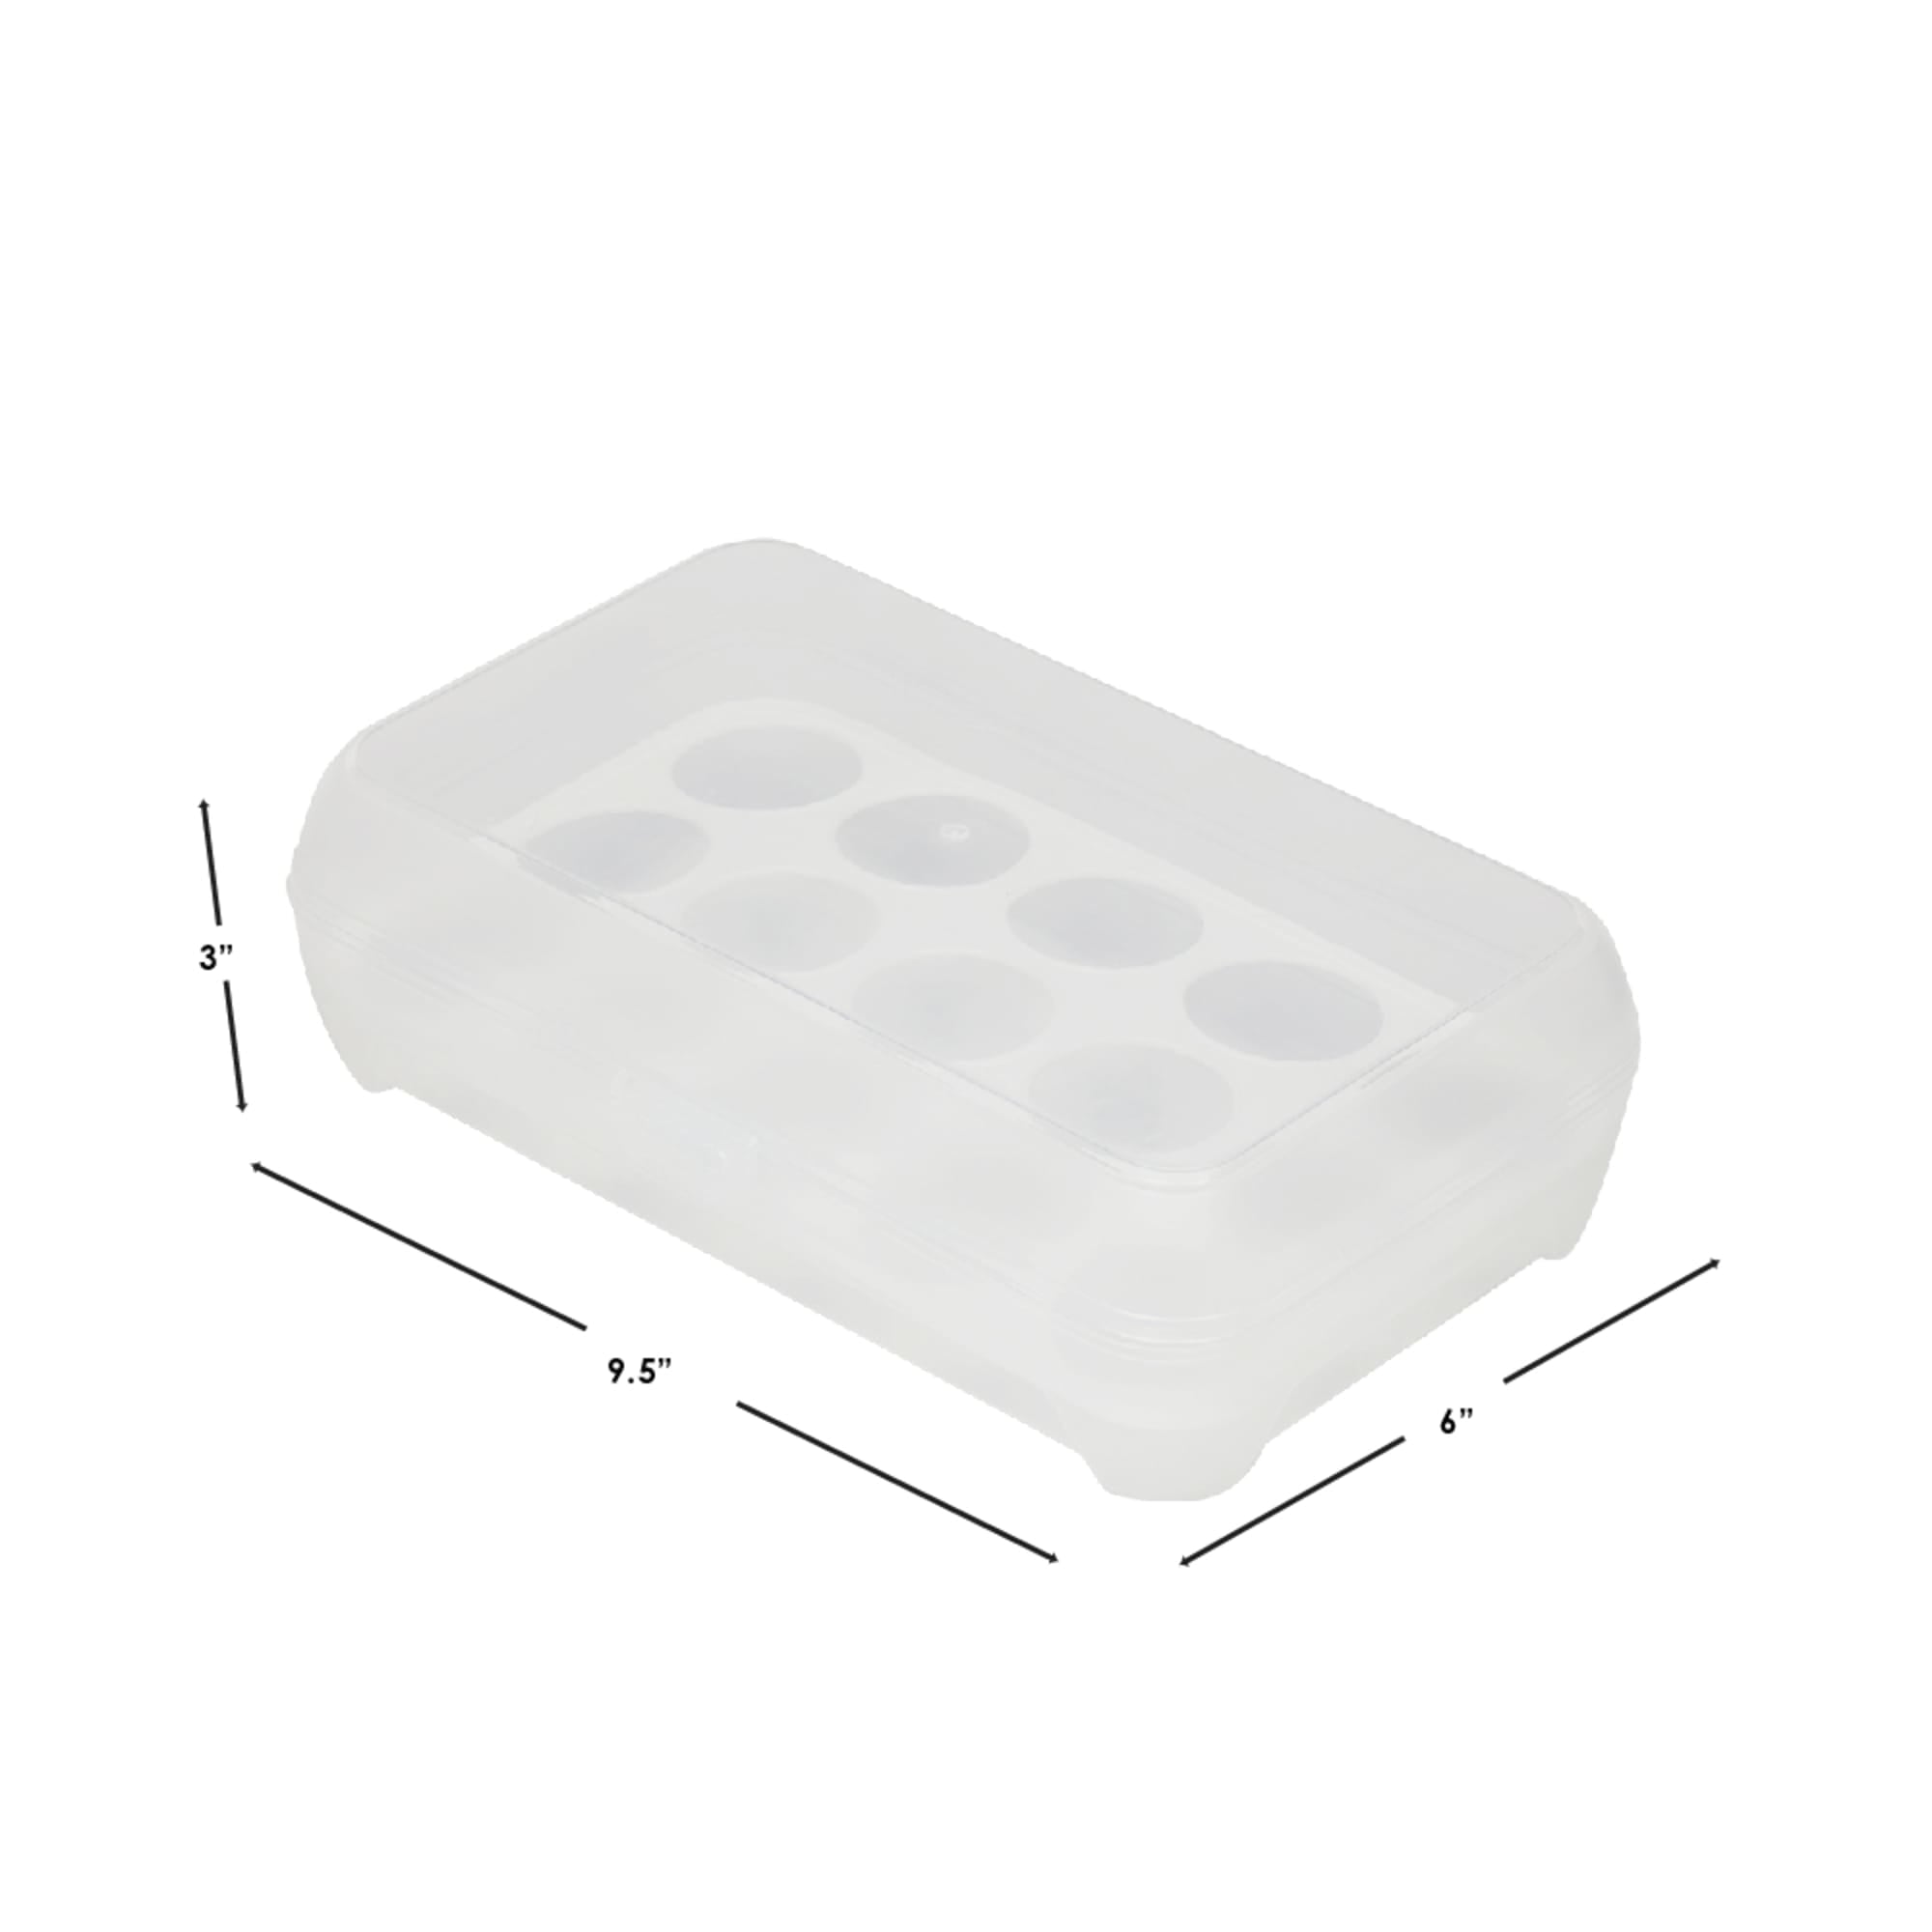 Home Basics 15 Compartment Plastic Egg Holder, Clear $2.00 EACH, CASE PACK OF 12